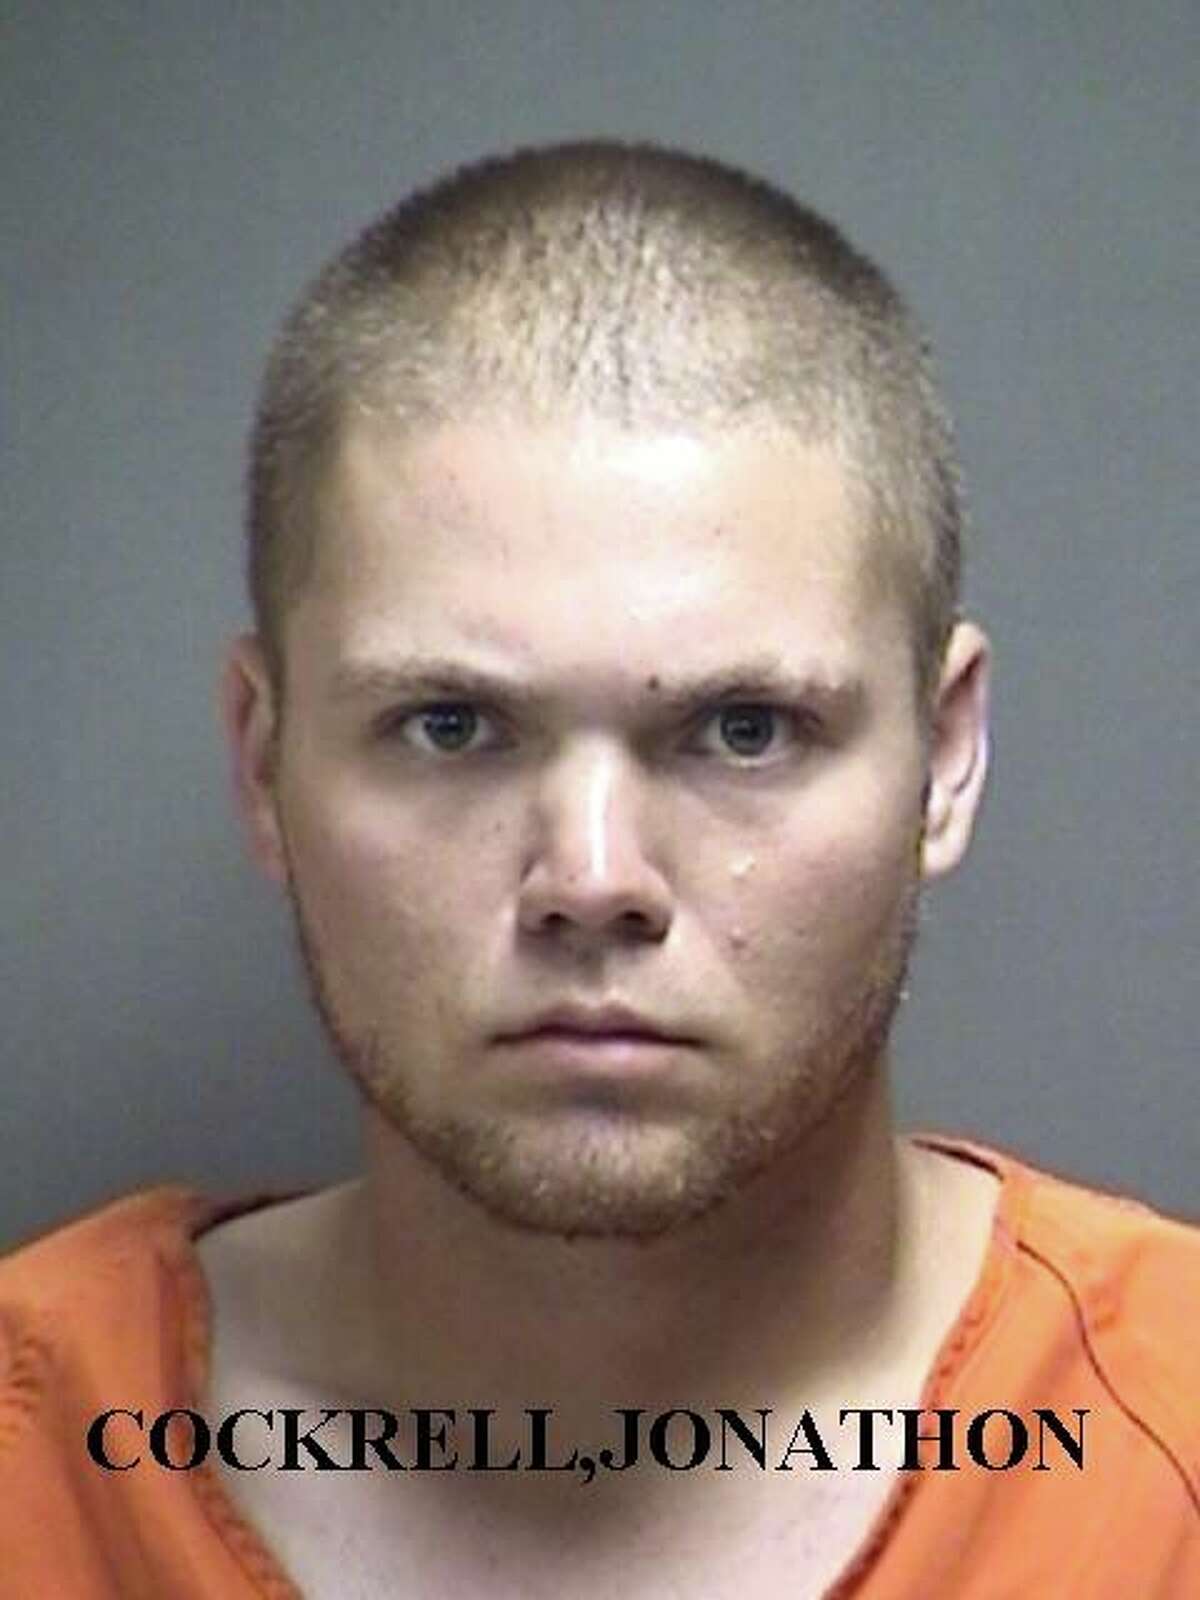 Jonathon Paul Cockrell, 24, of Mesquite, faces numerous charges, including Arkansas warrants for possession of drugs and firearms, as well as charges of manufacturing or delivering of control substance, unlawful carry of a weapon, possession of a dangerous drug, possession of marijuana, and possession of drug paraphernalia.